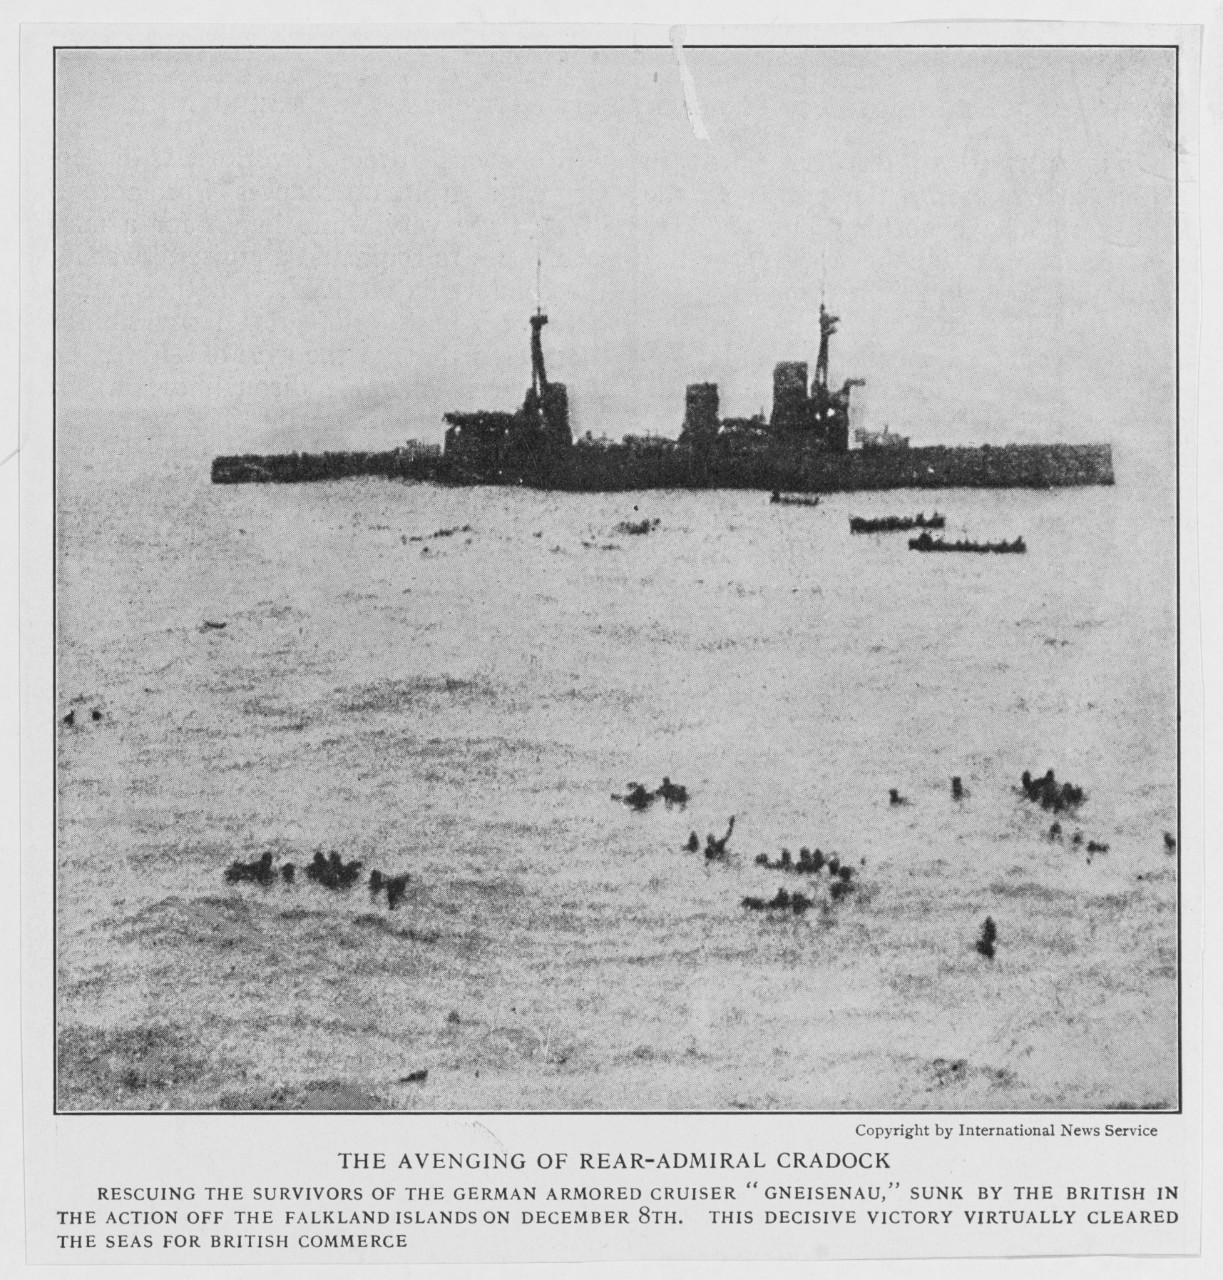 Rescuing the survivors of the German Armored Cruiser "GNEISENAU" sunk by the British